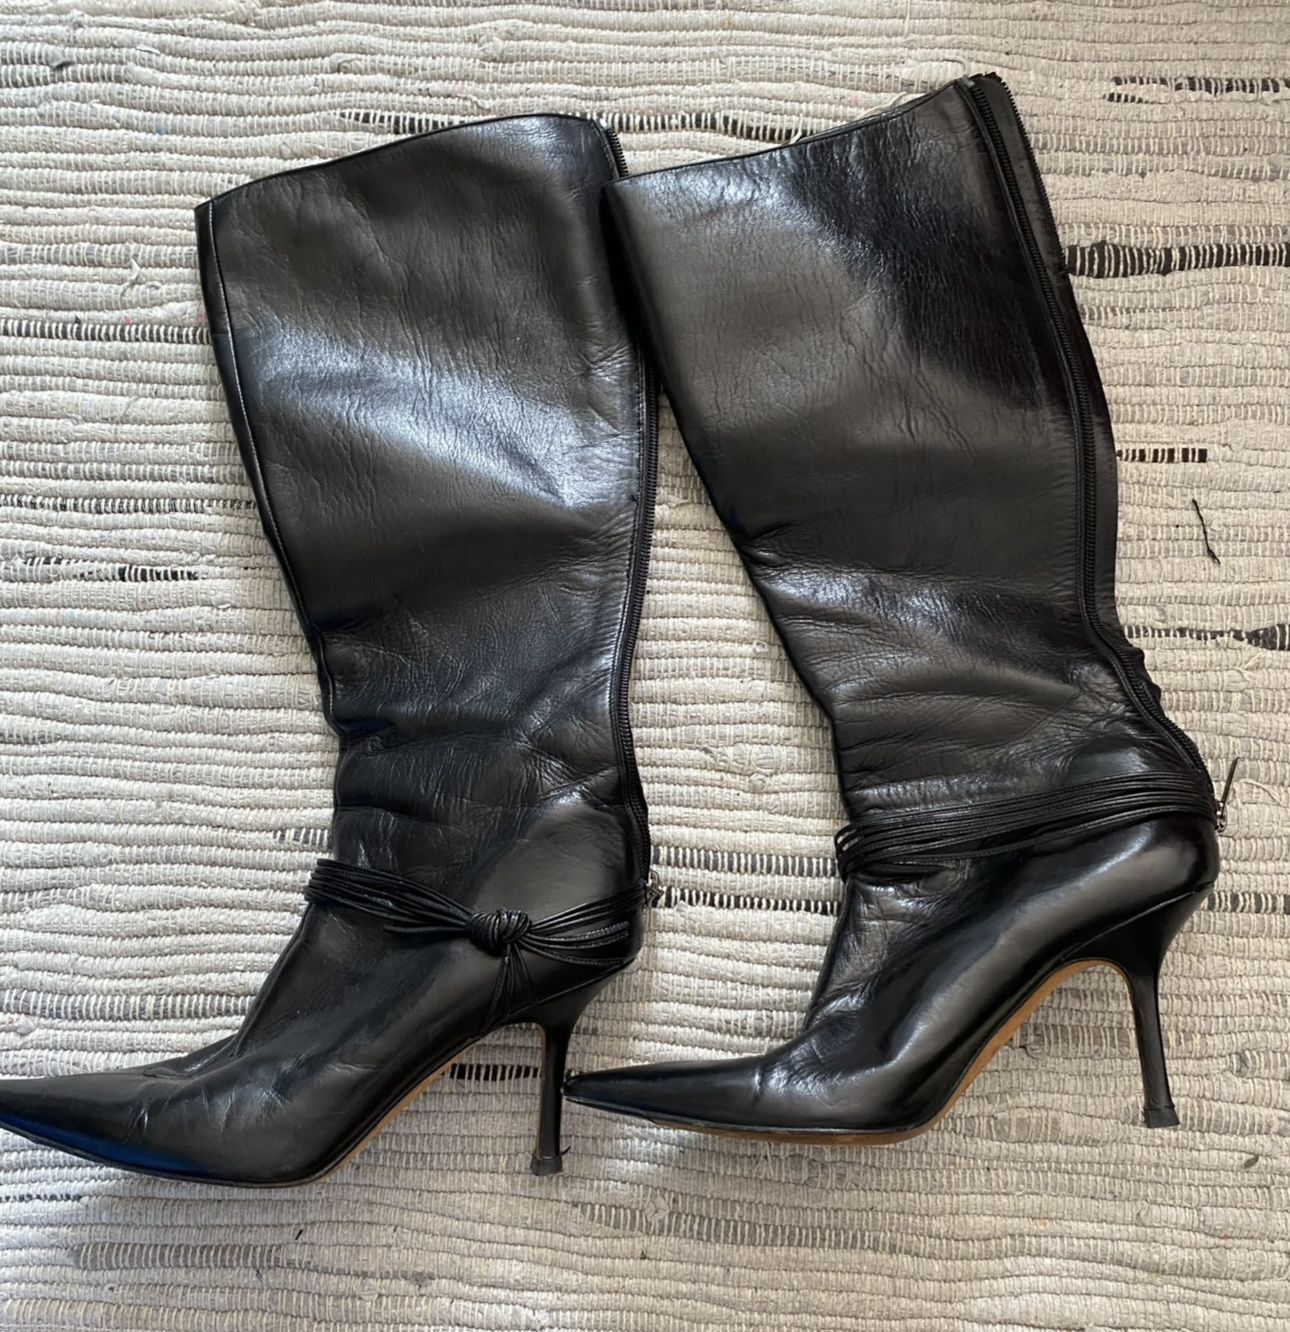 Authentic Jimmy Choo Leather Boots